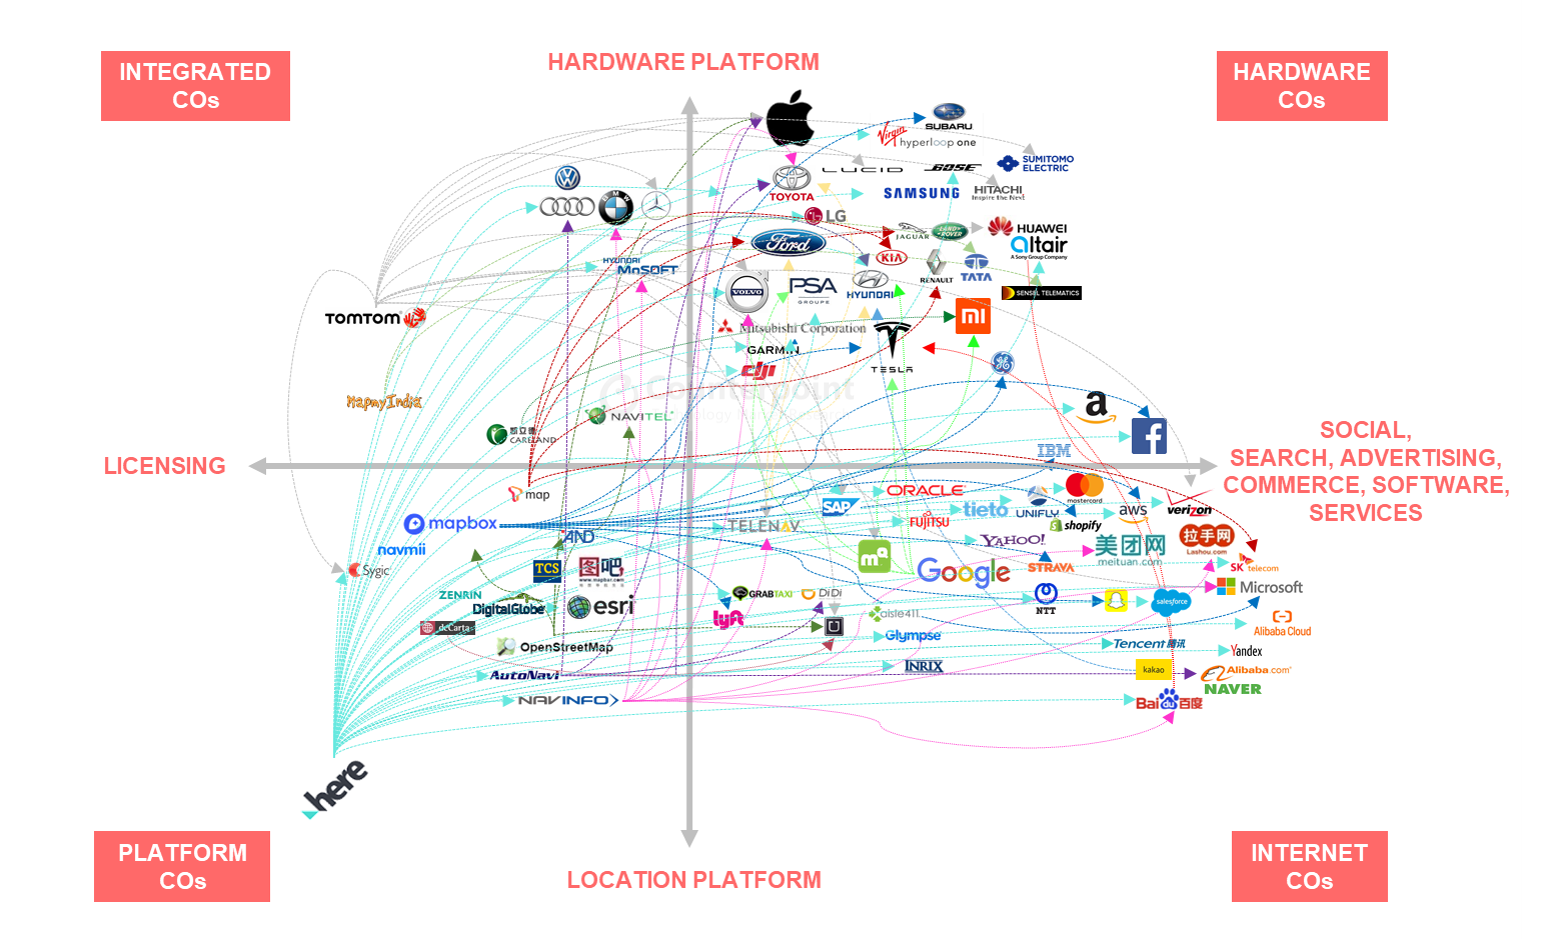 HERE, Google & TomTom Continue to Lead Location Platform Landscape